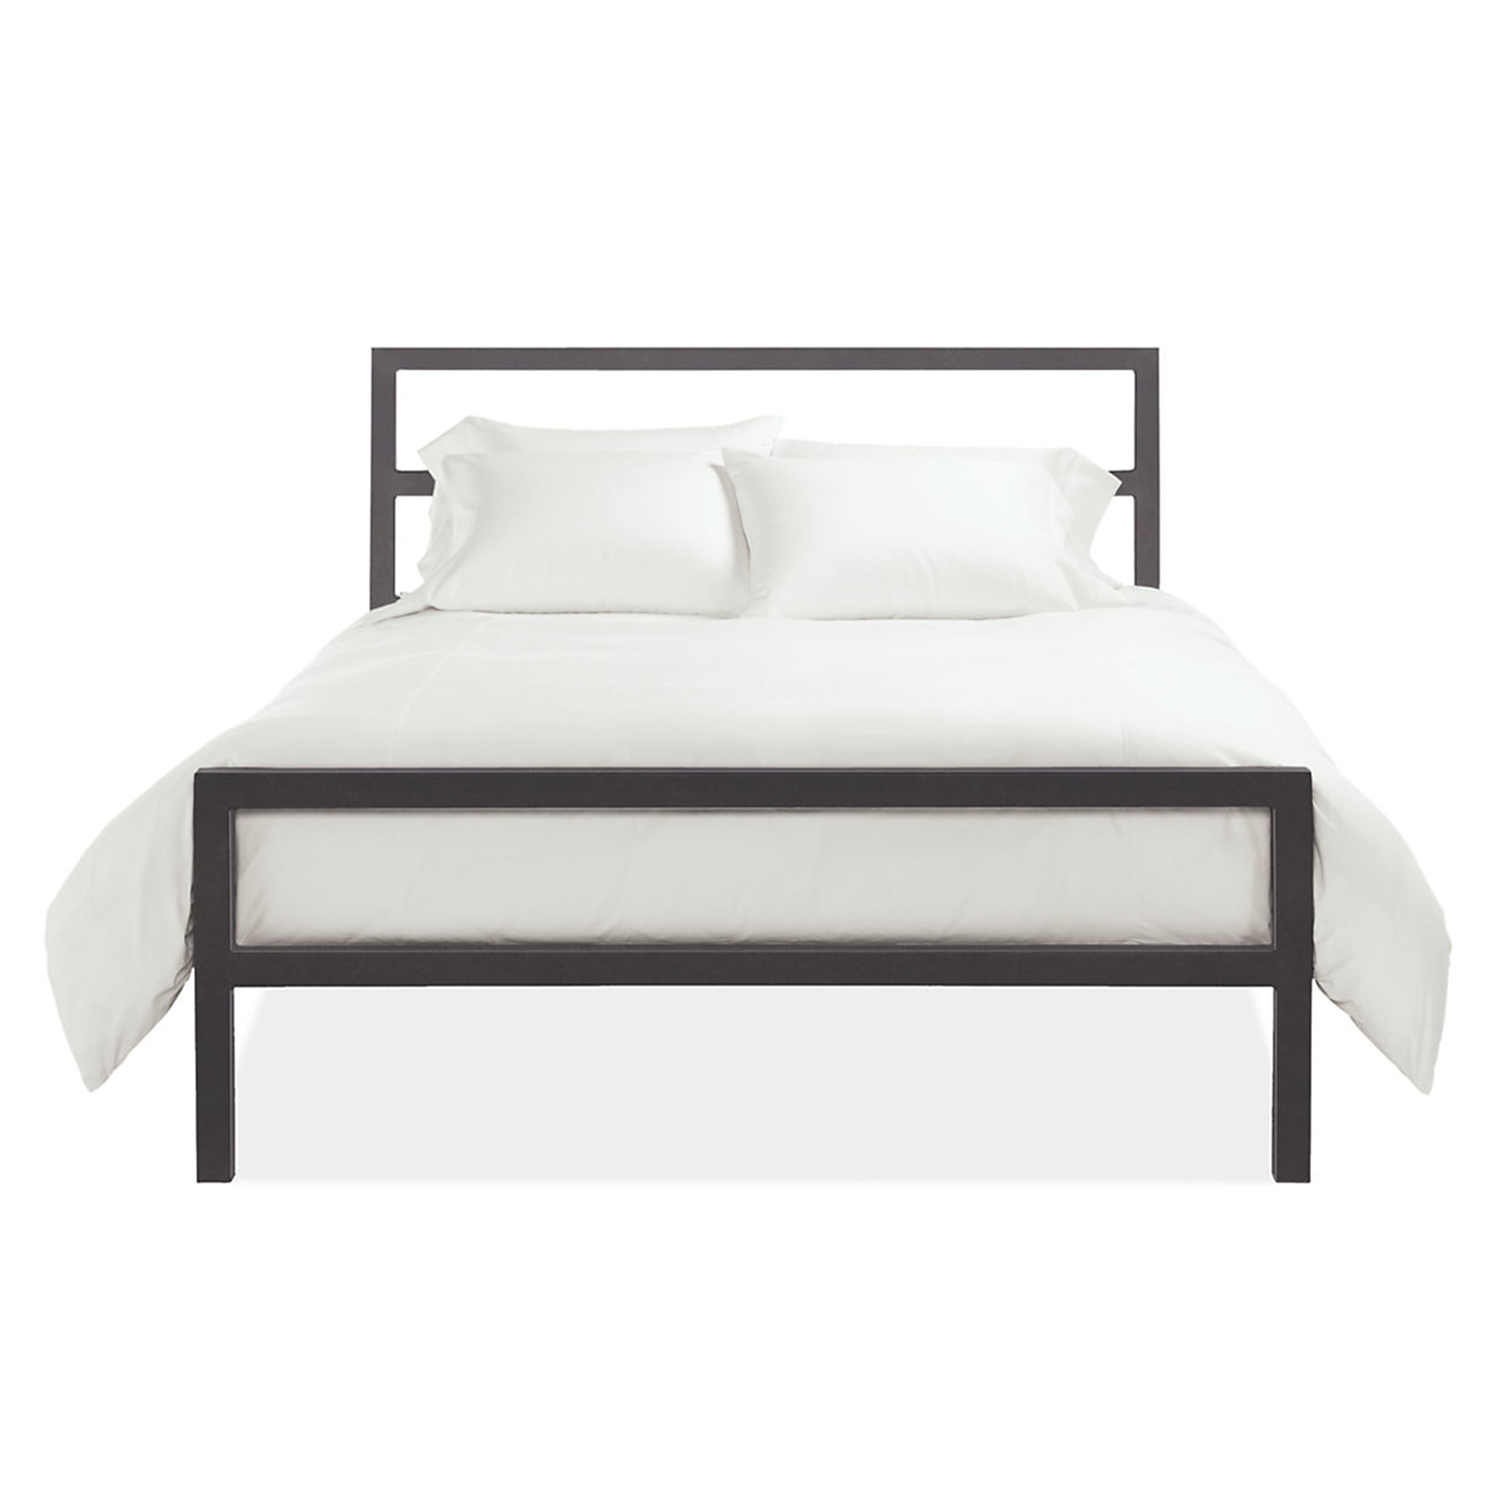 Parsons bed frame with white bedding